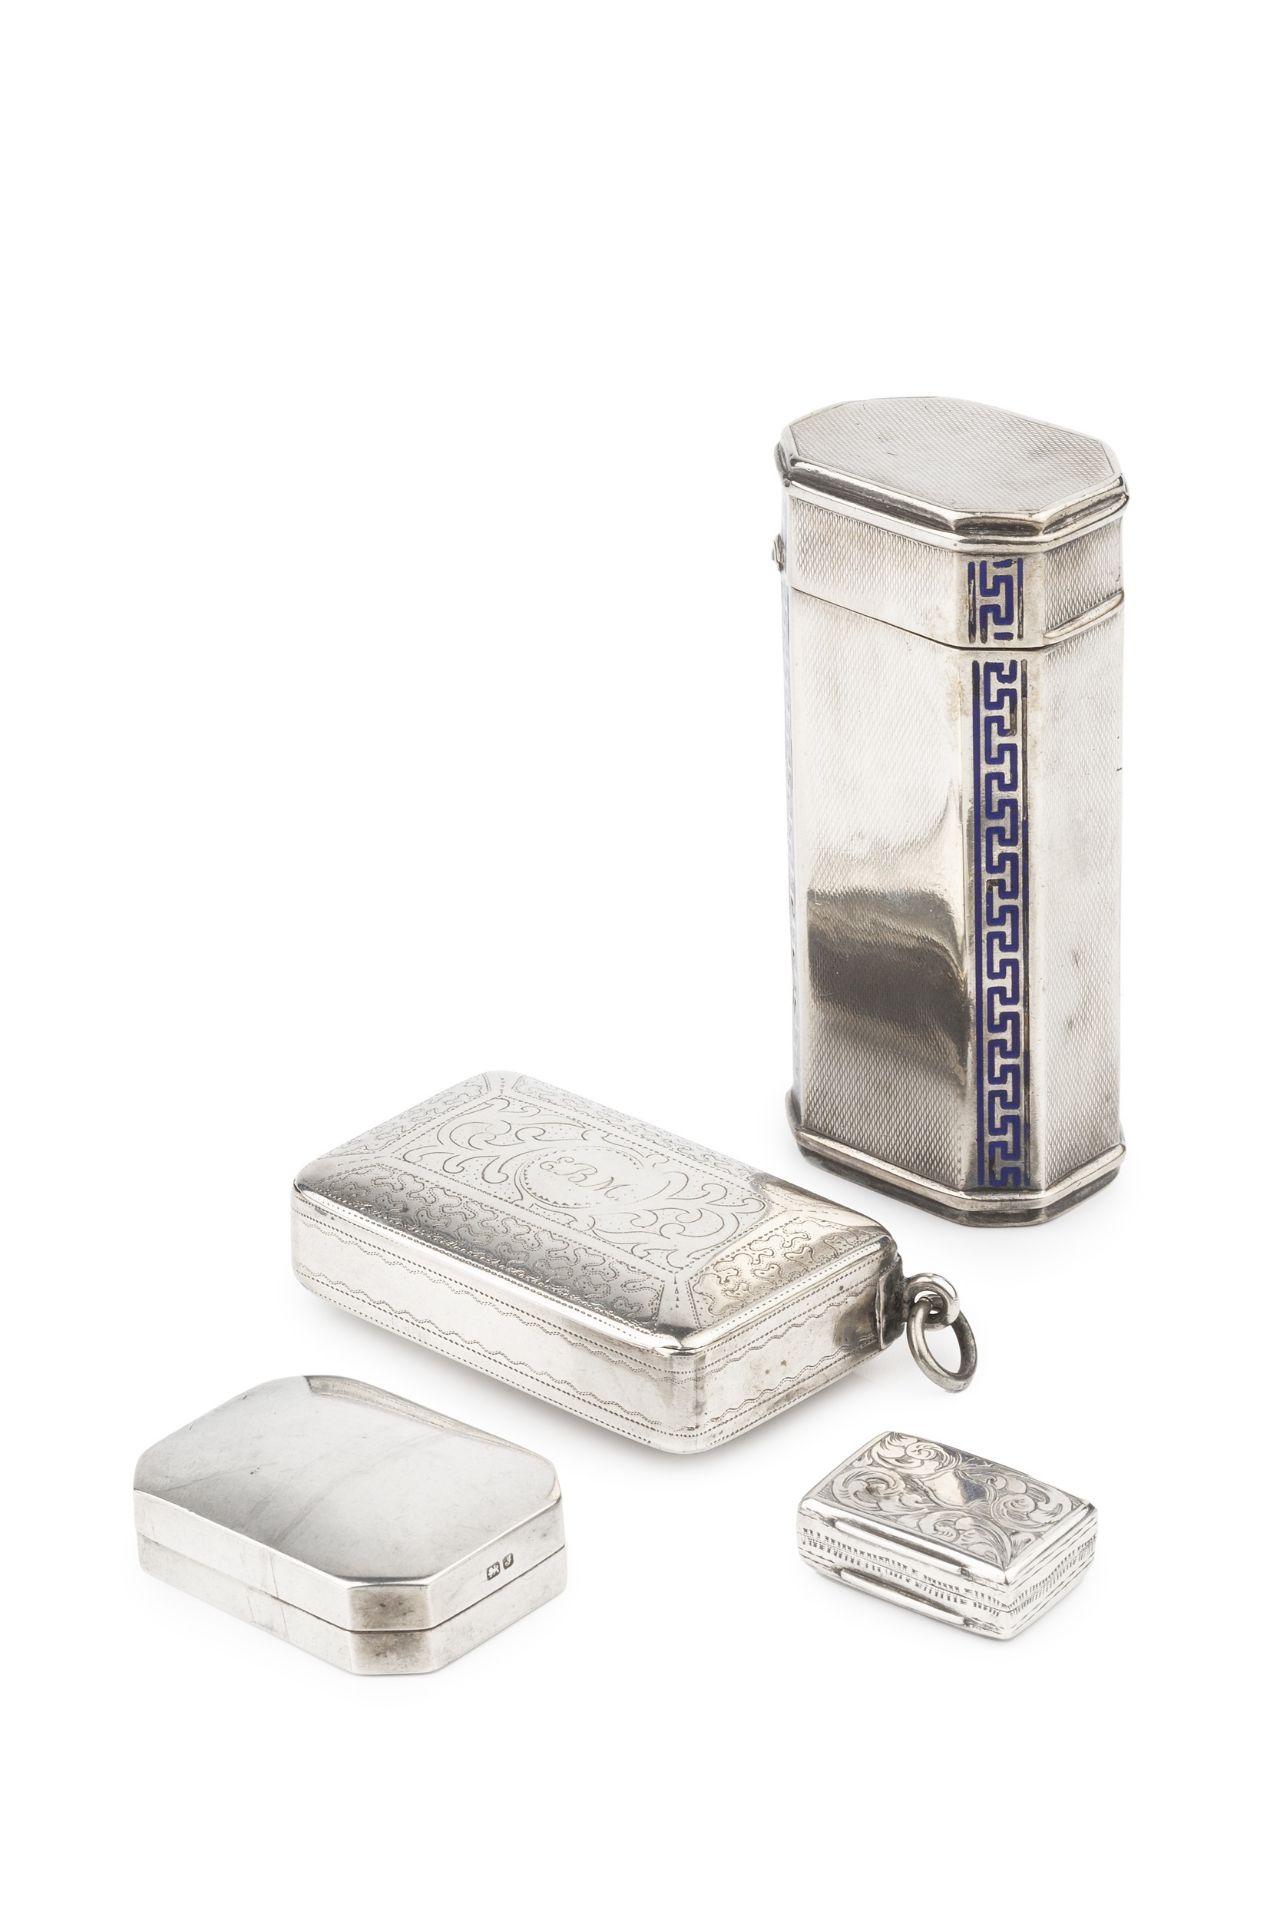 An early Victorian silver rectangular vinaigrette, with engraved decoration, and pierced hinged